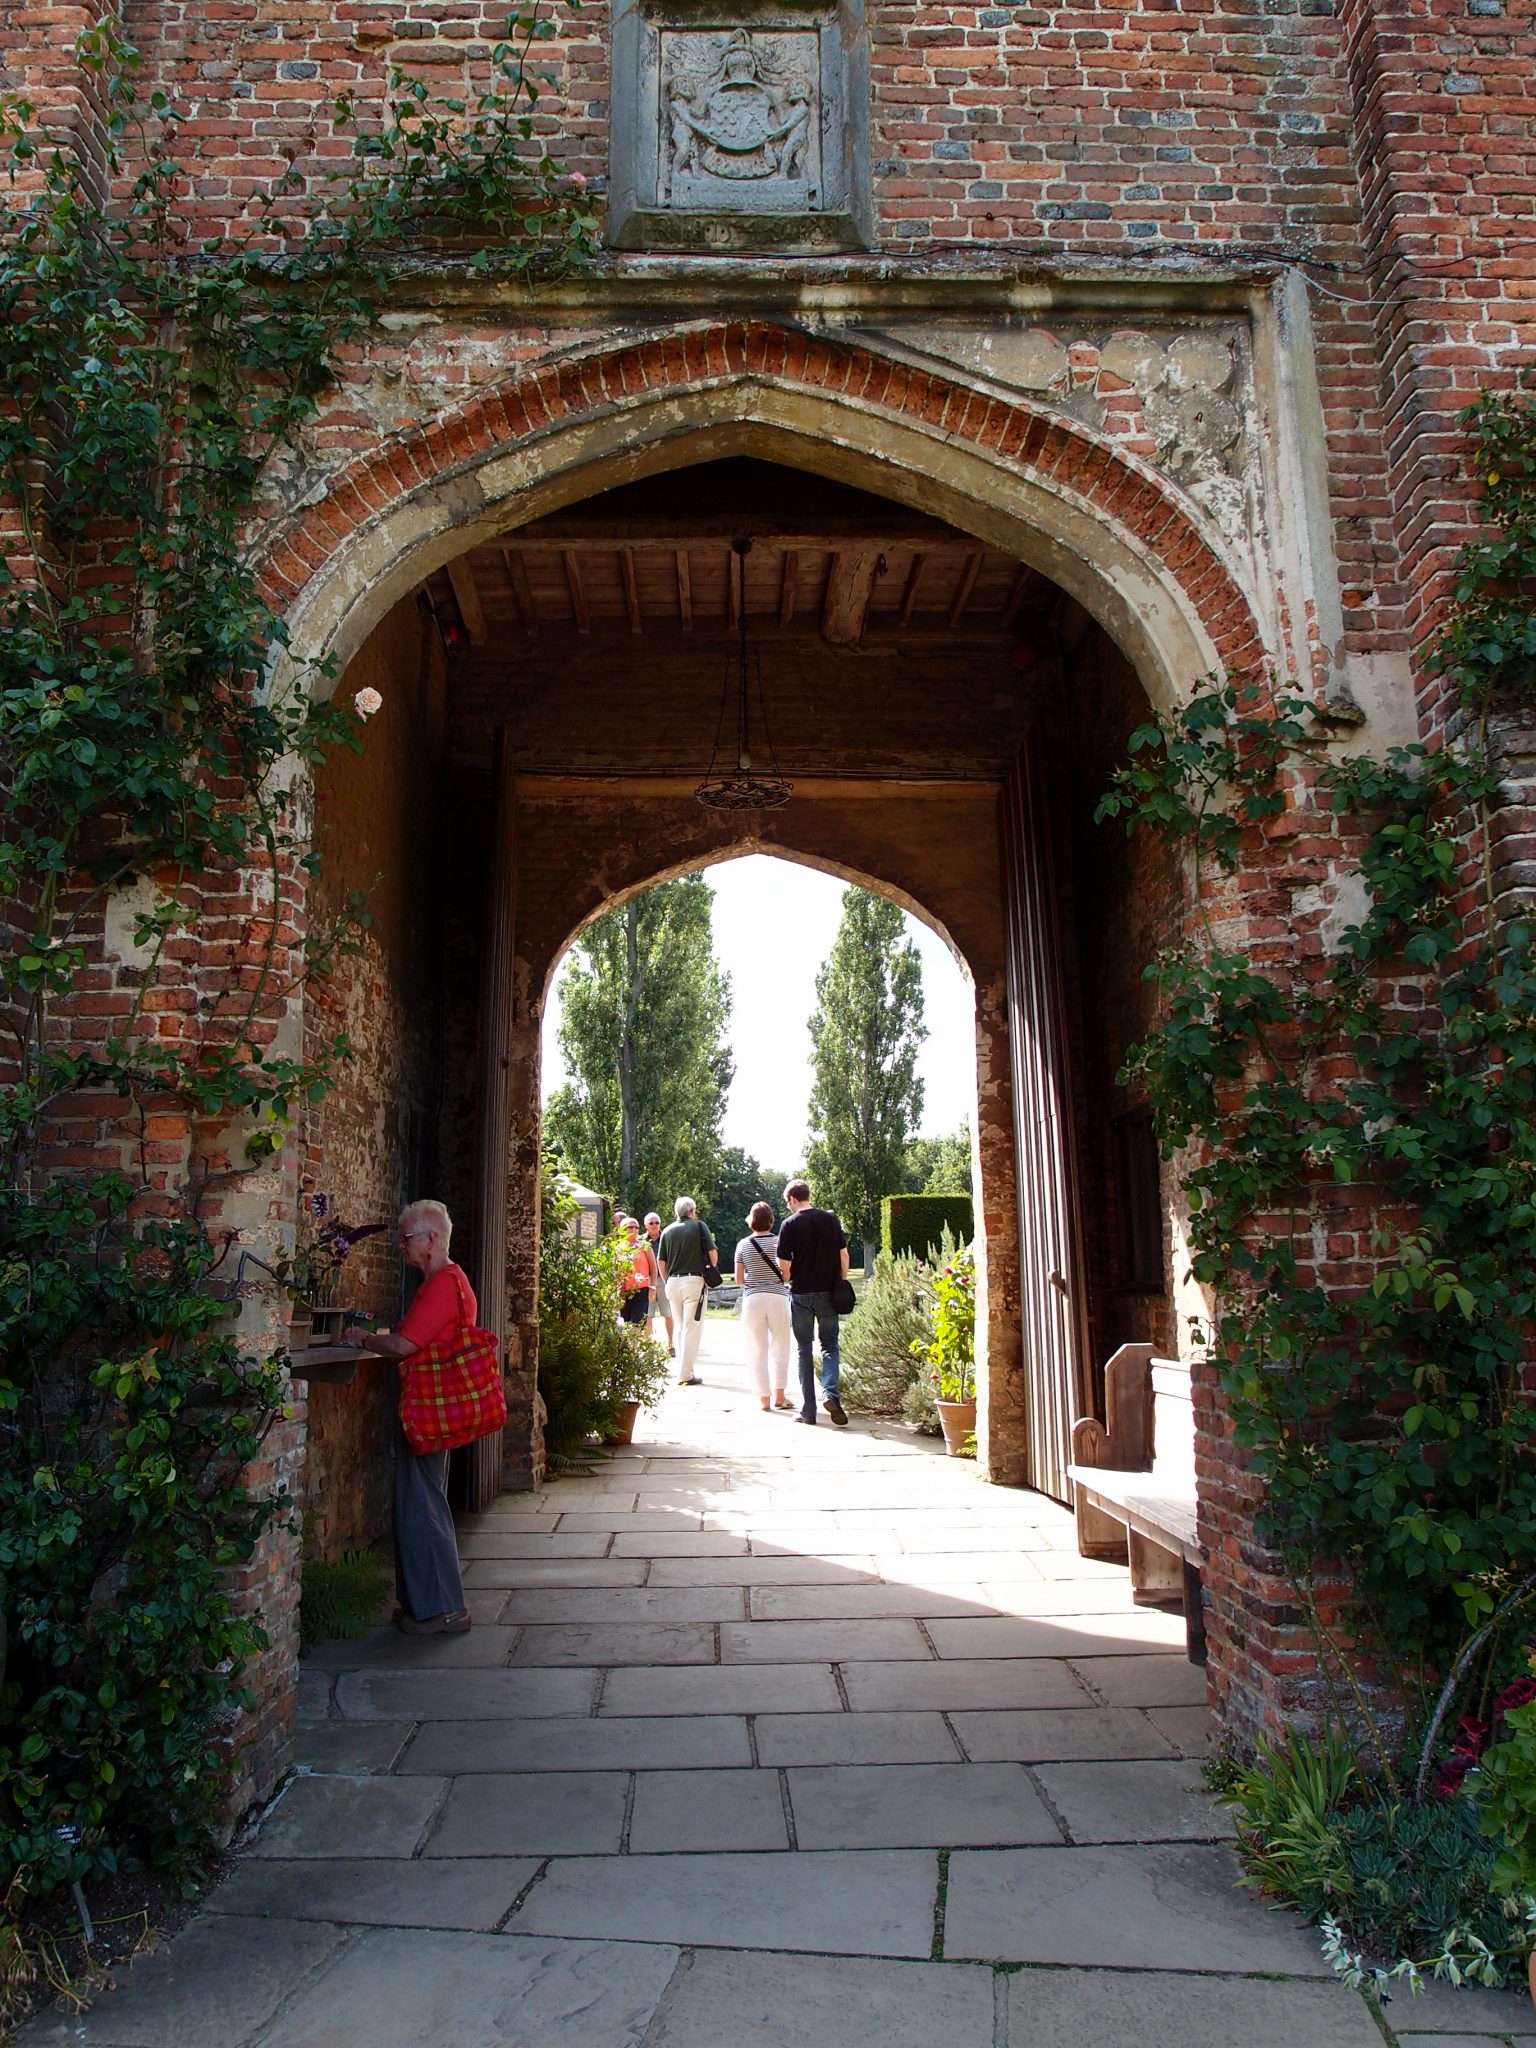 Amanda and I had completed our Sissinghurst visit, and we exited through the Main House's Archway.